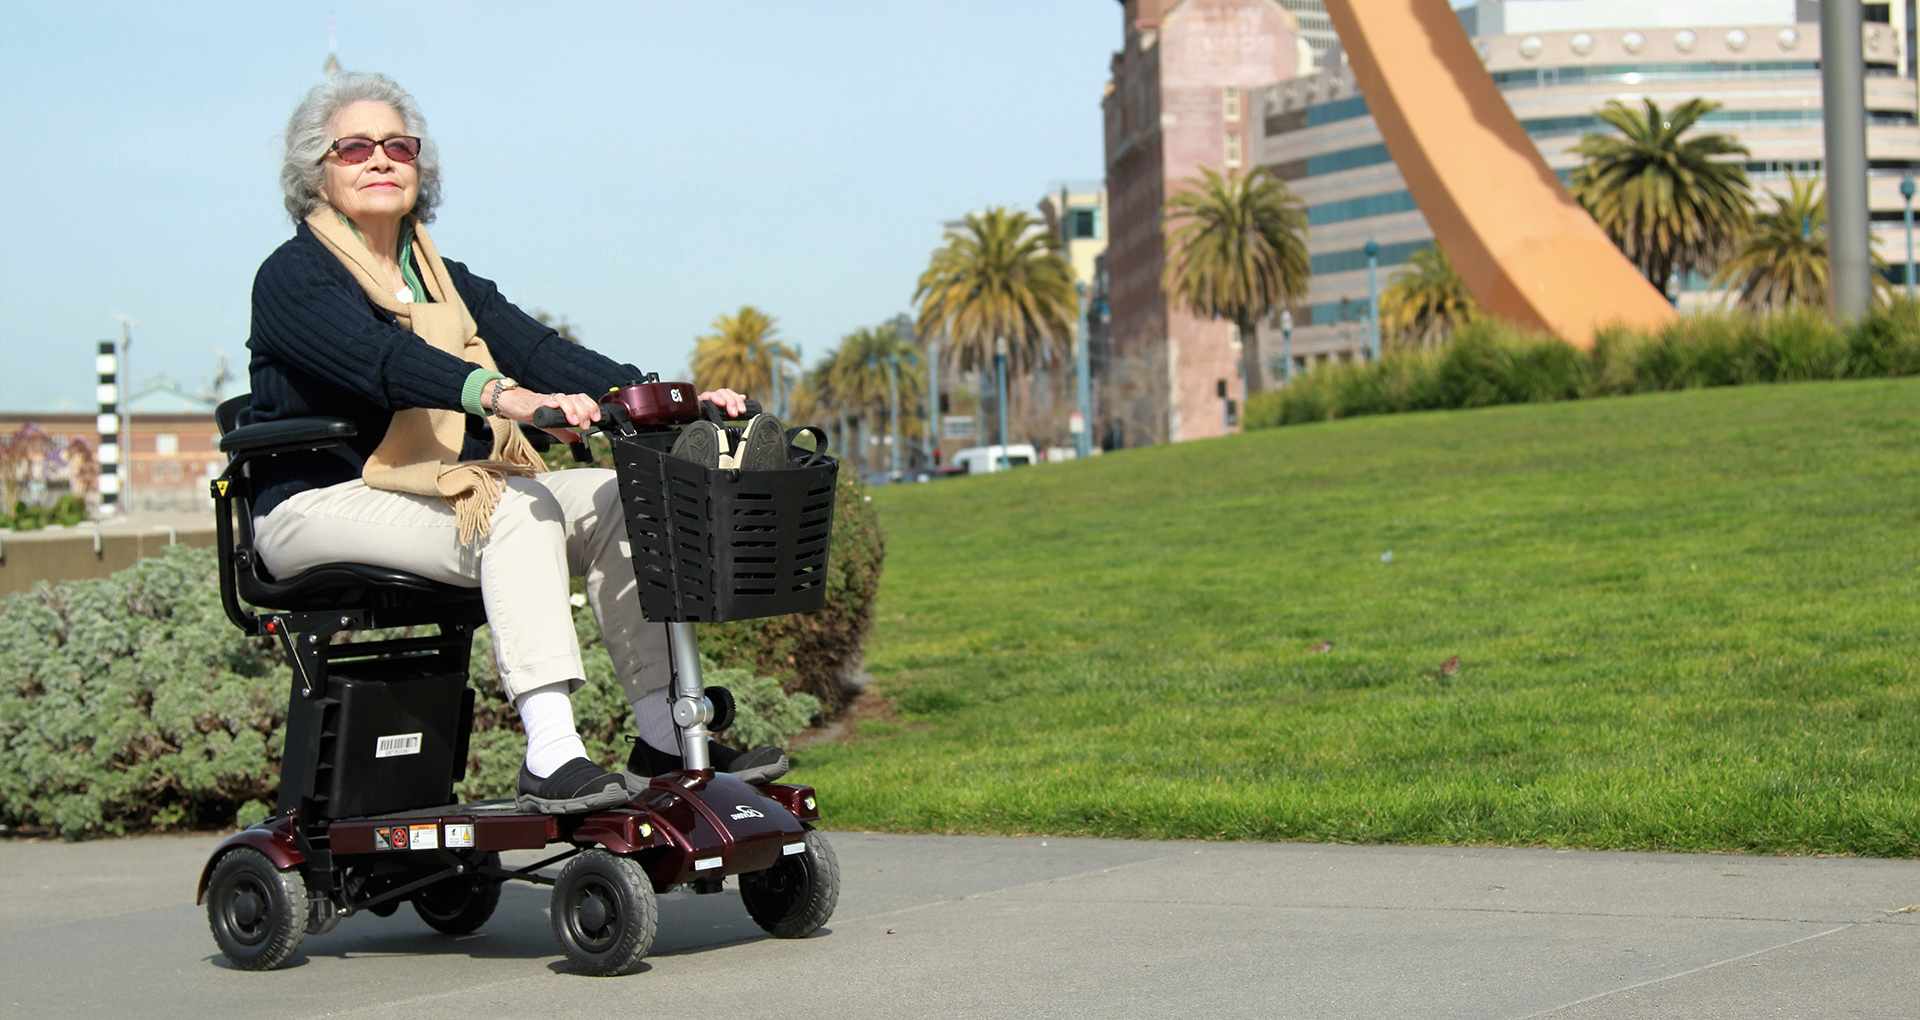 An elderly lady riding a portable i3 mobility scooter through a park on a sunny day, enjoying the ride.